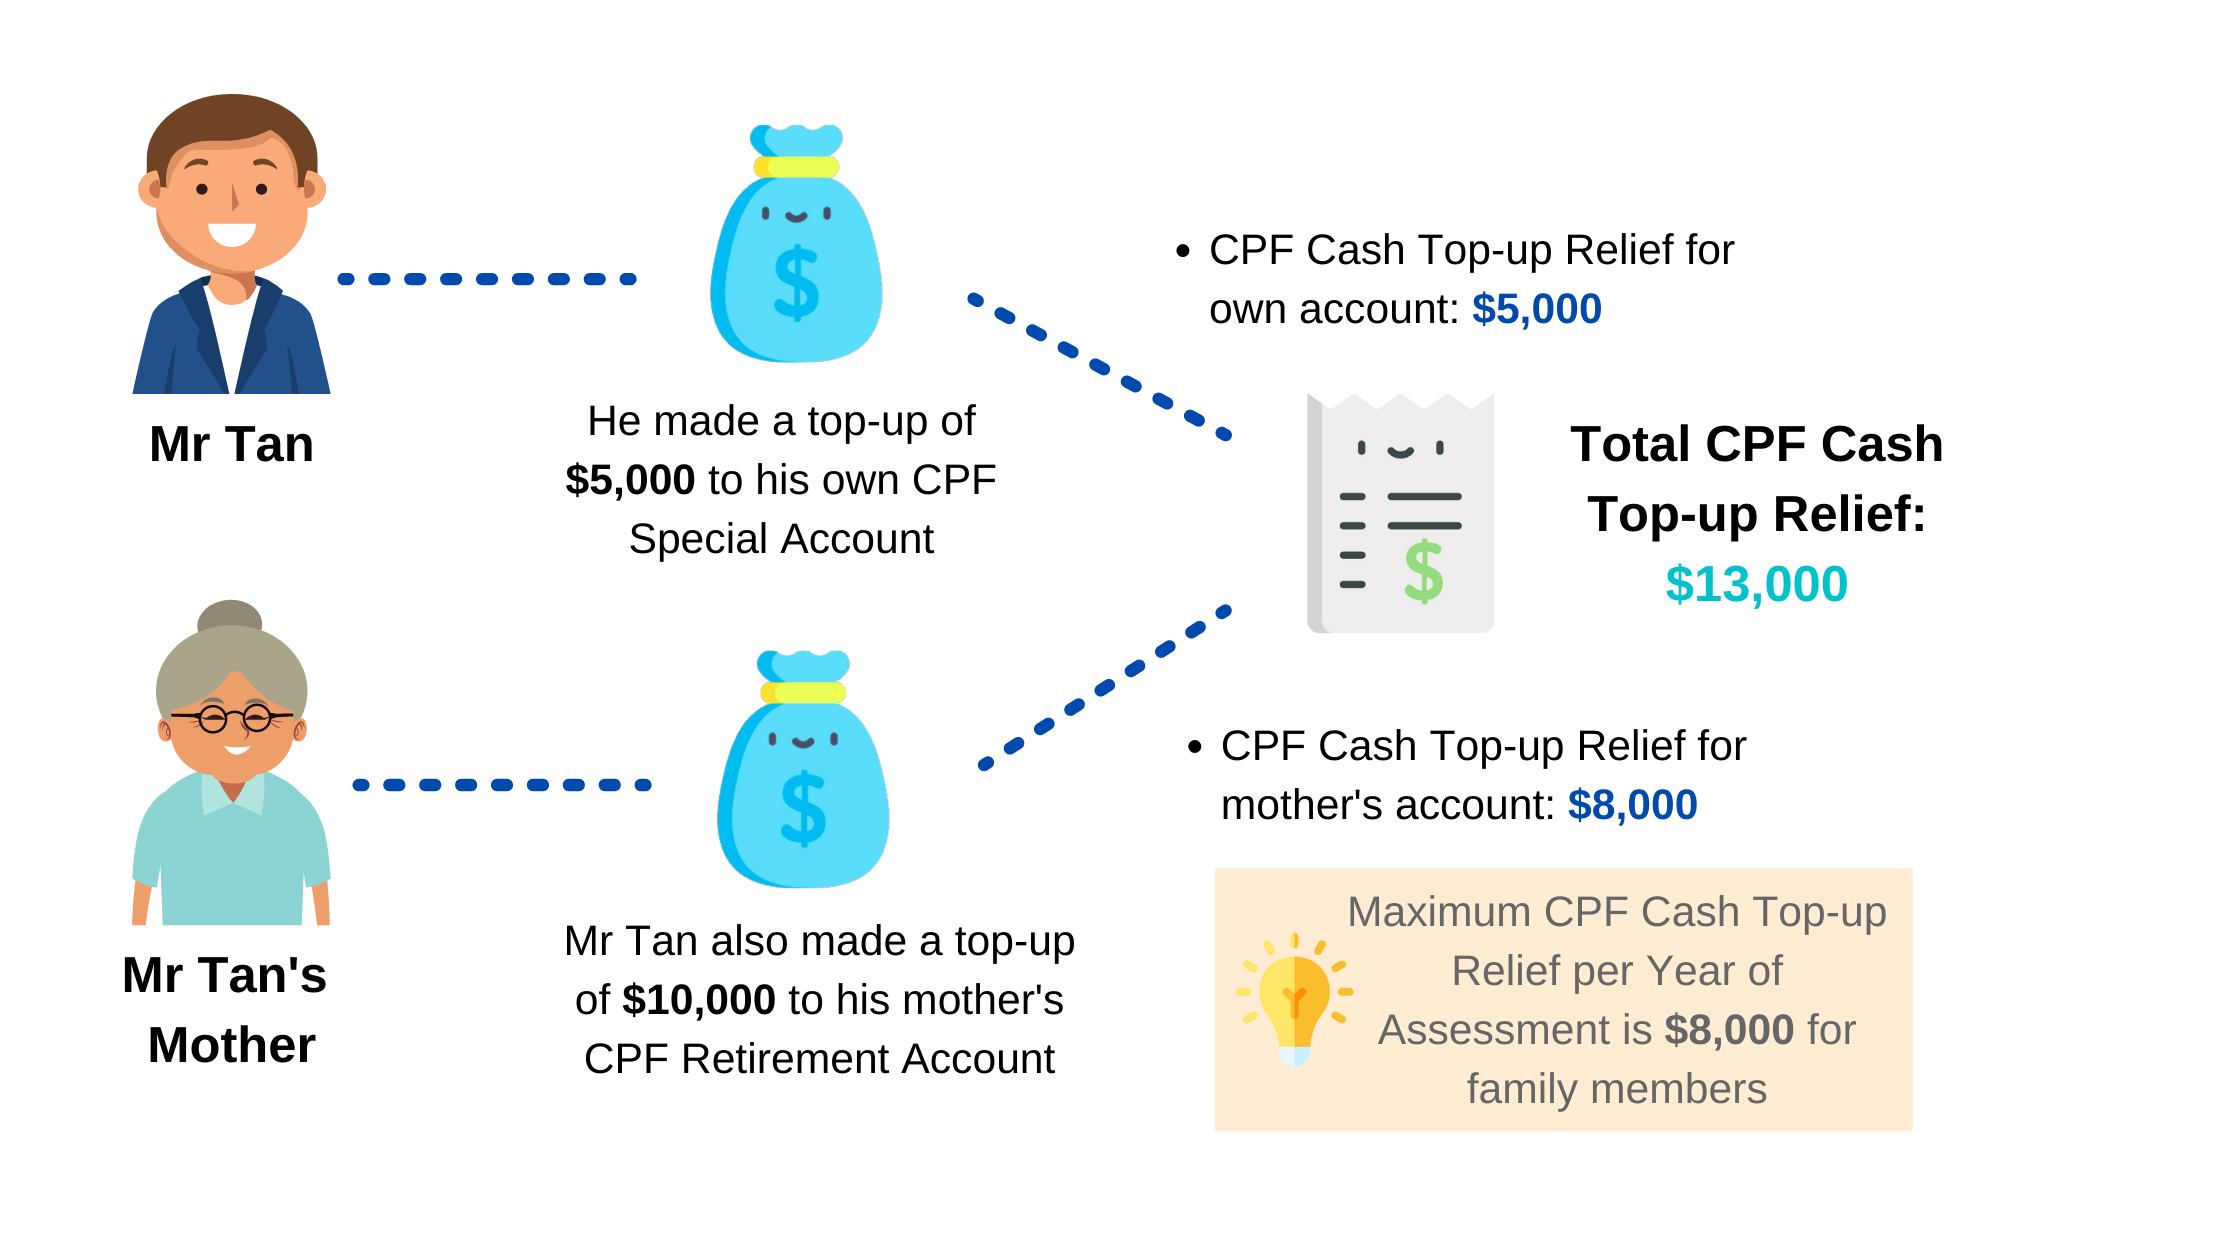 IRAS Central Provident Fund (CPF) Cash Topup Relief